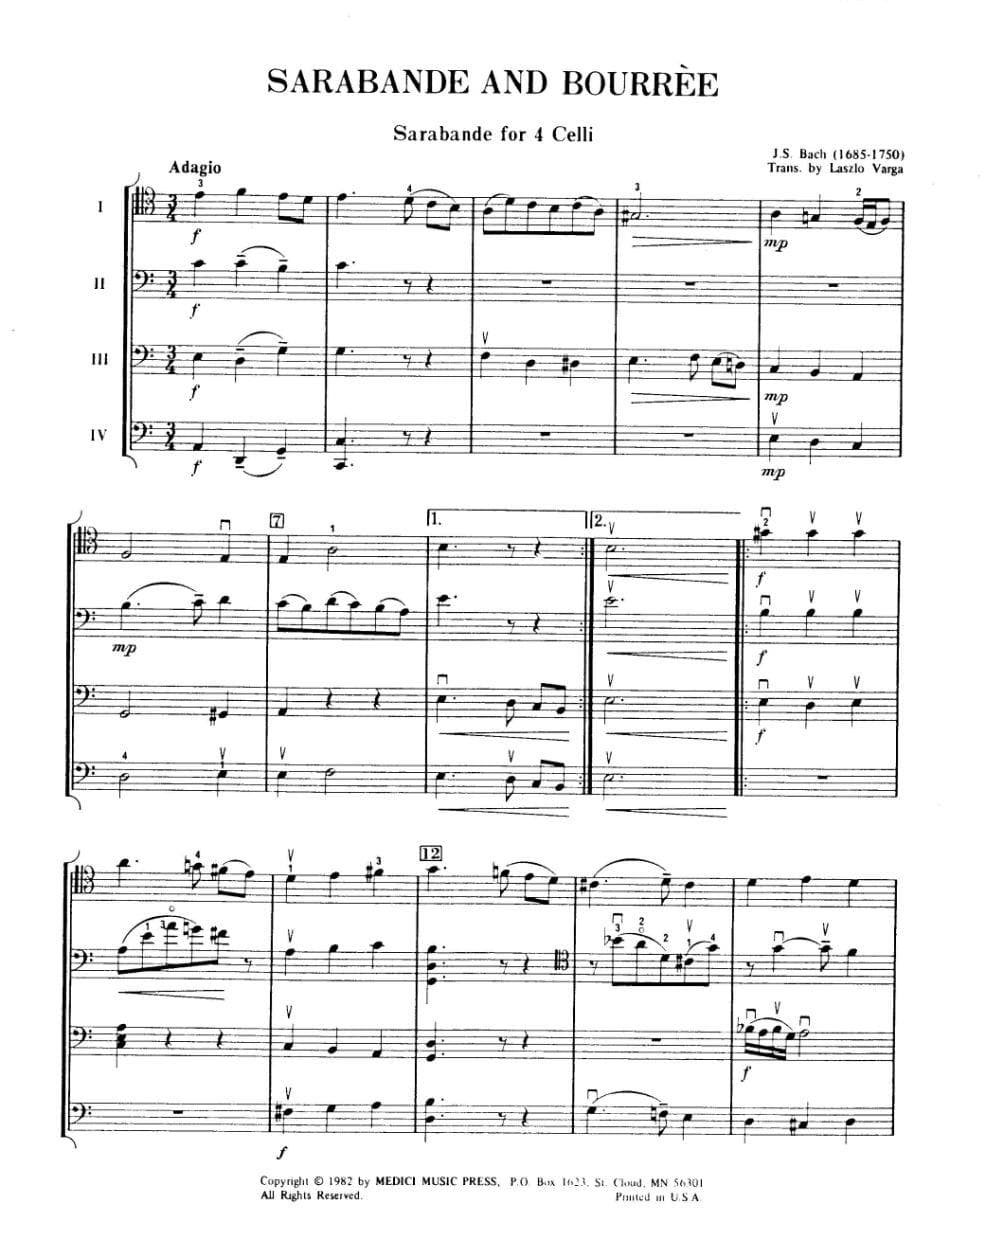 Bach, JS - Sarabande and Bourree BWV 1002 for Four Cellos - Score and Parts - Arranged by Varga - MusiCelli Publication